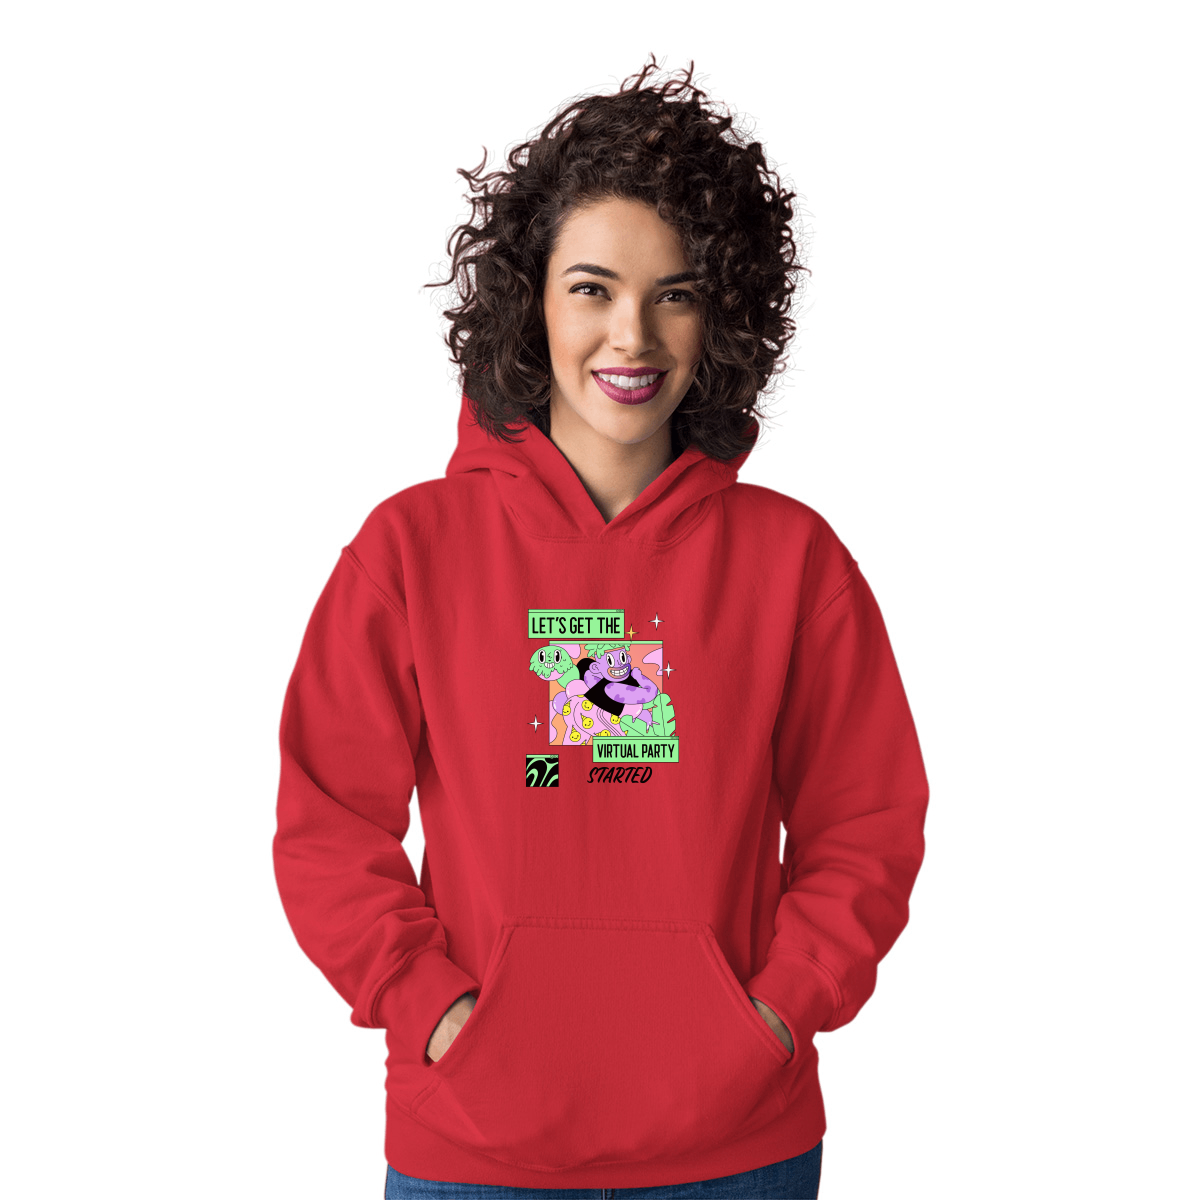 Let's get the virtual party started Unisex Hoodie | Red